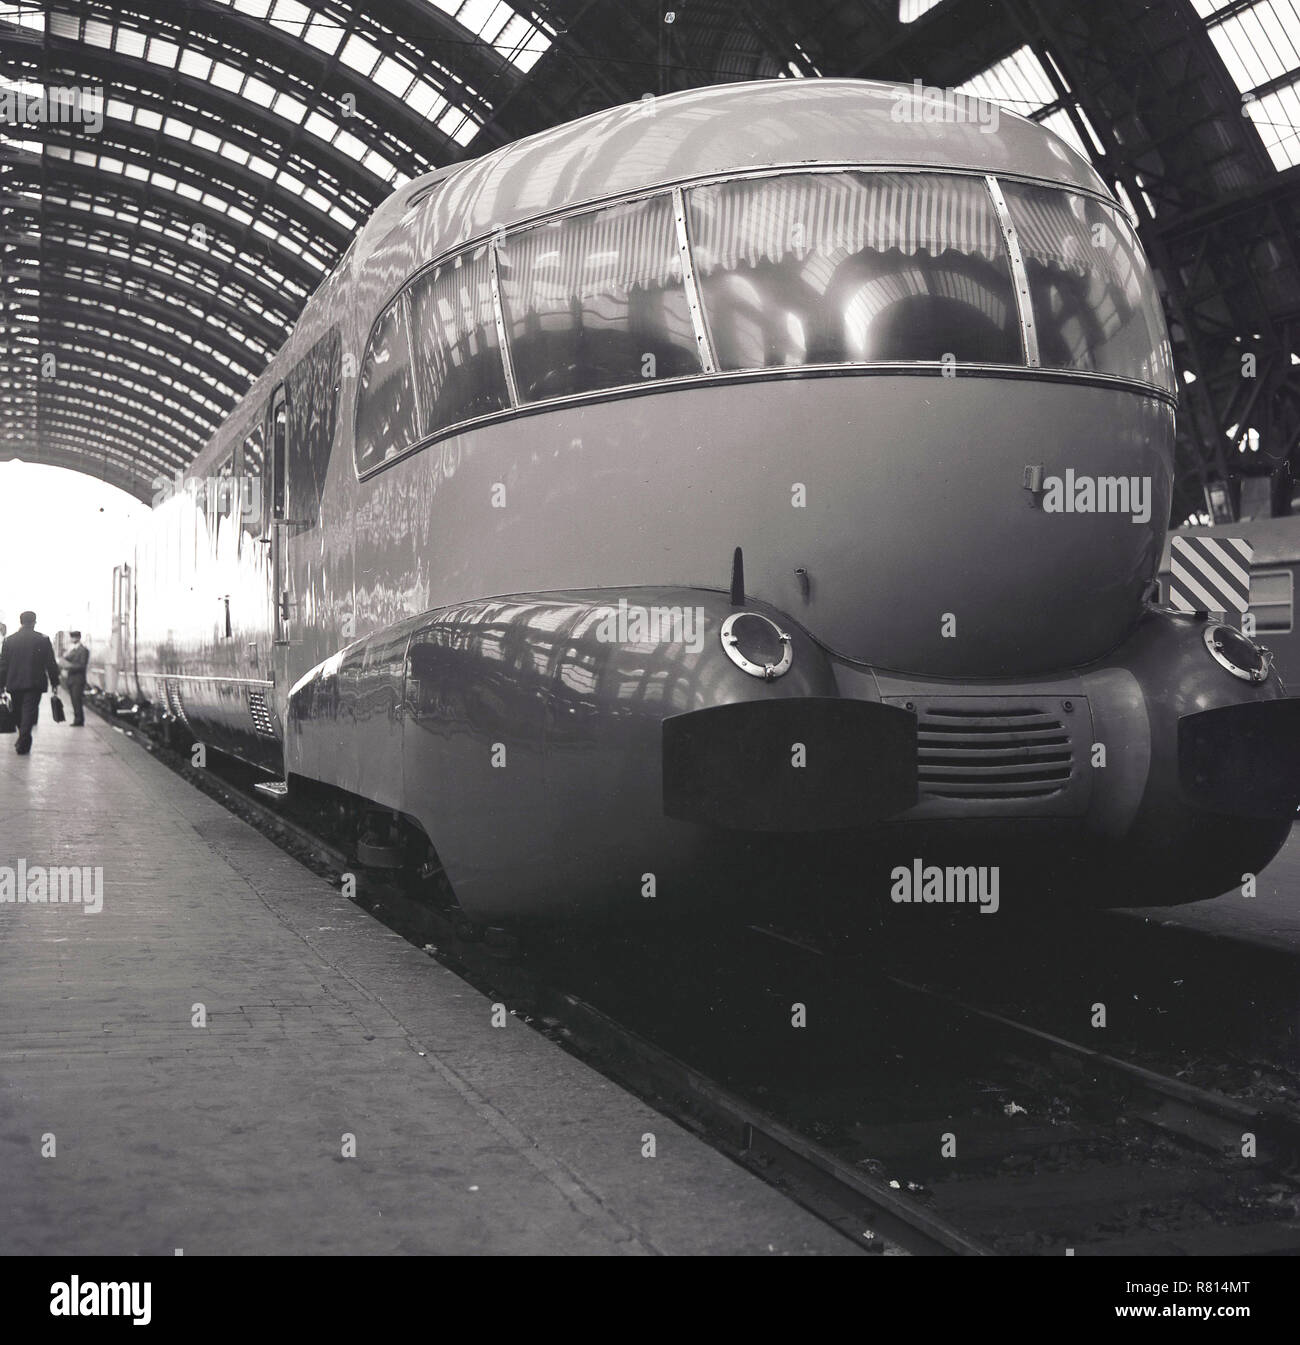 1960, historical, distinctive Italian train, the'Settebello', on a railway platform at Milan centrale station. Introduced in 1953, this high-speed express train covered the Milano-Roma route and was operated by the Italian State Railways (FS) and featured observation lounges at the front and rear of the the train. Stock Photo